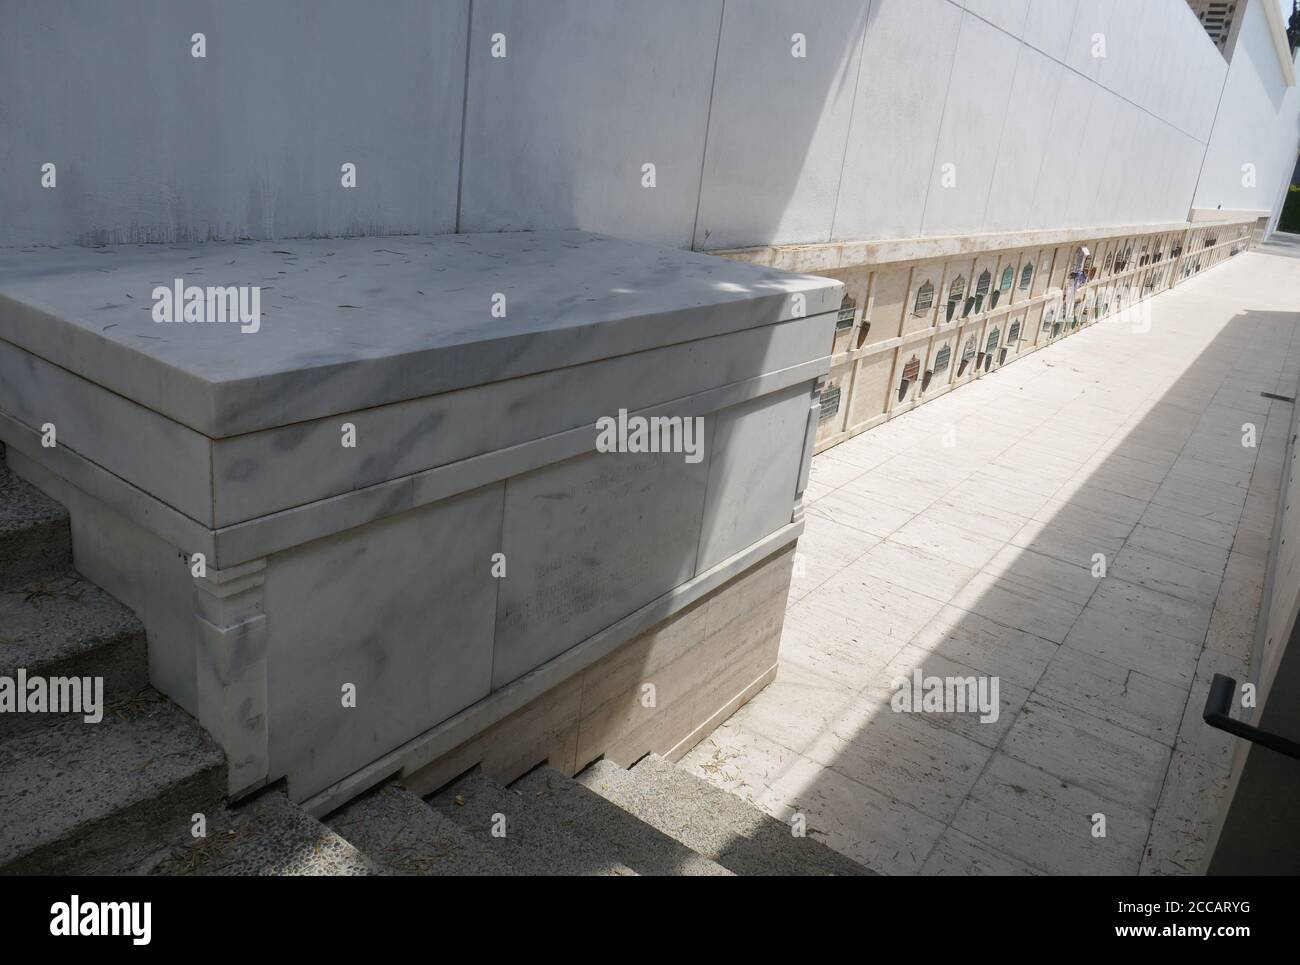 Hollywood, California, USA 17th August 2020 A general view of atmosphere of Composer Woody Herman's Grave at Hollywood Forever Cemetery on August 17, 2020 in Hollywood, California, USA. Photo by Barry King/Alamy Stock Photo Stock Photo